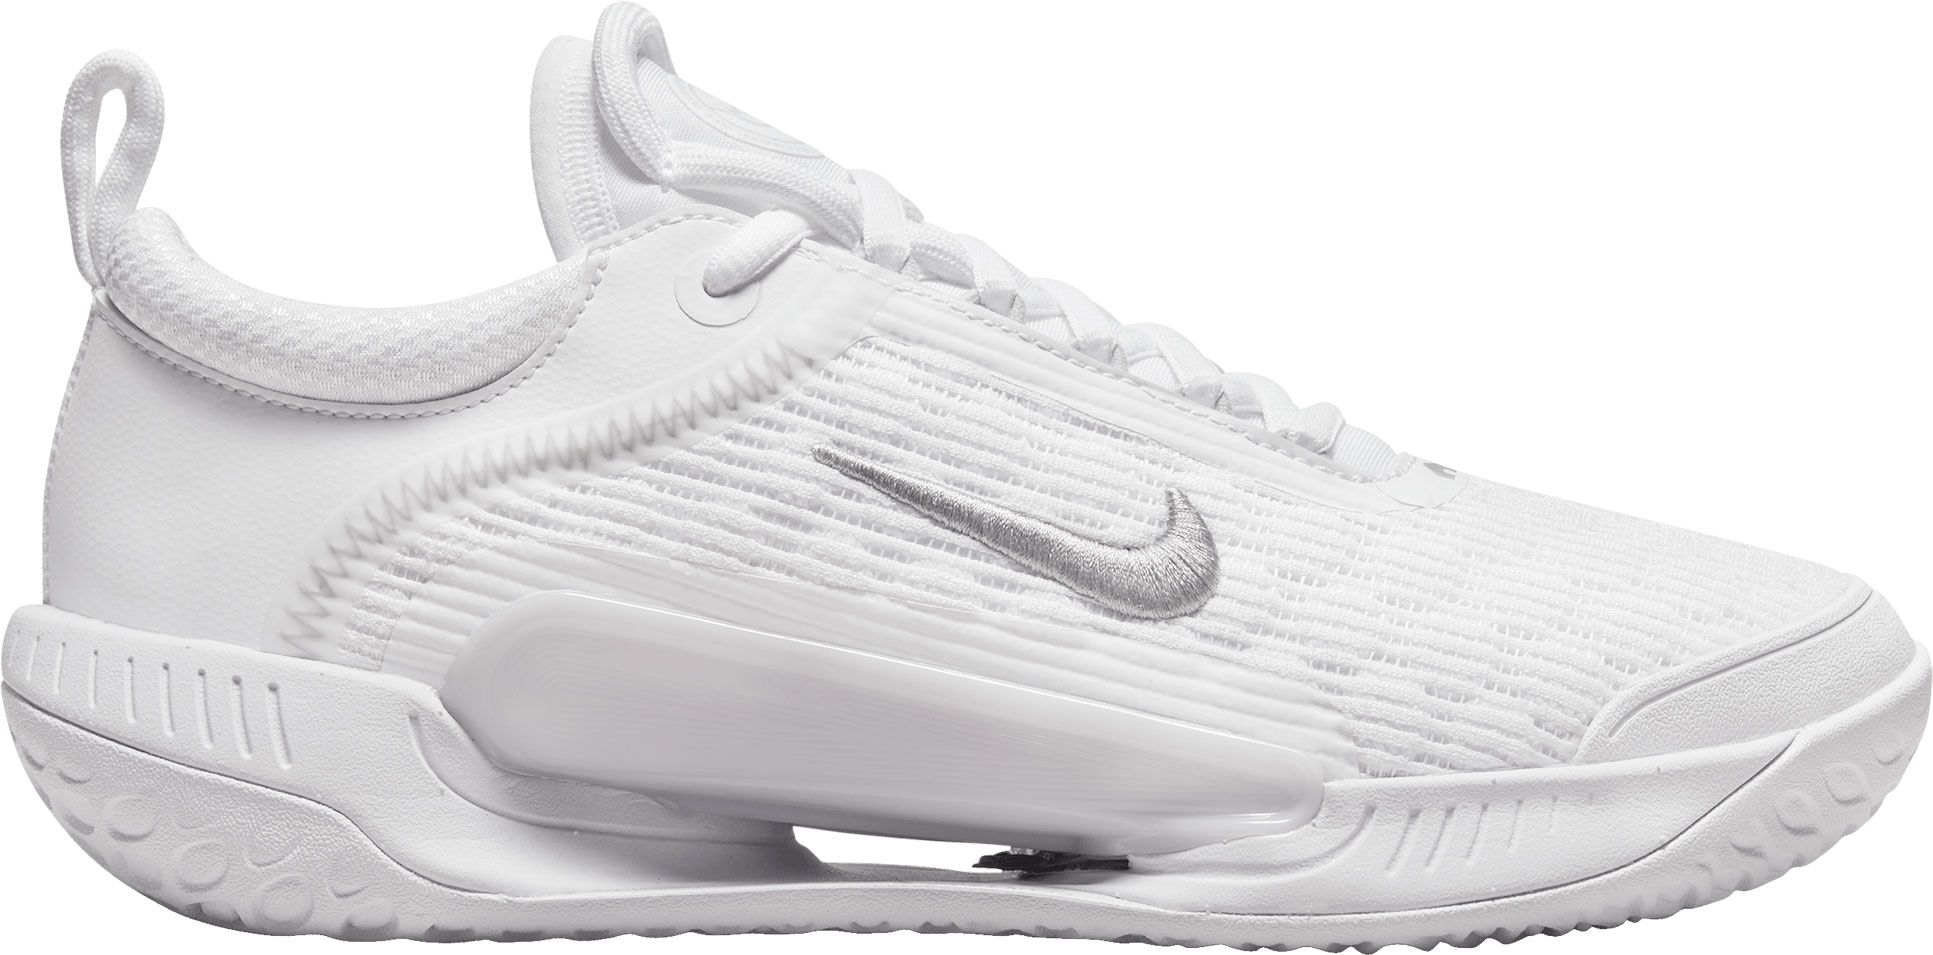 Nikecourt Women's Zoom Court NXT Hard Court Tennis Shoes, Size 9, White/Silver | Back to School